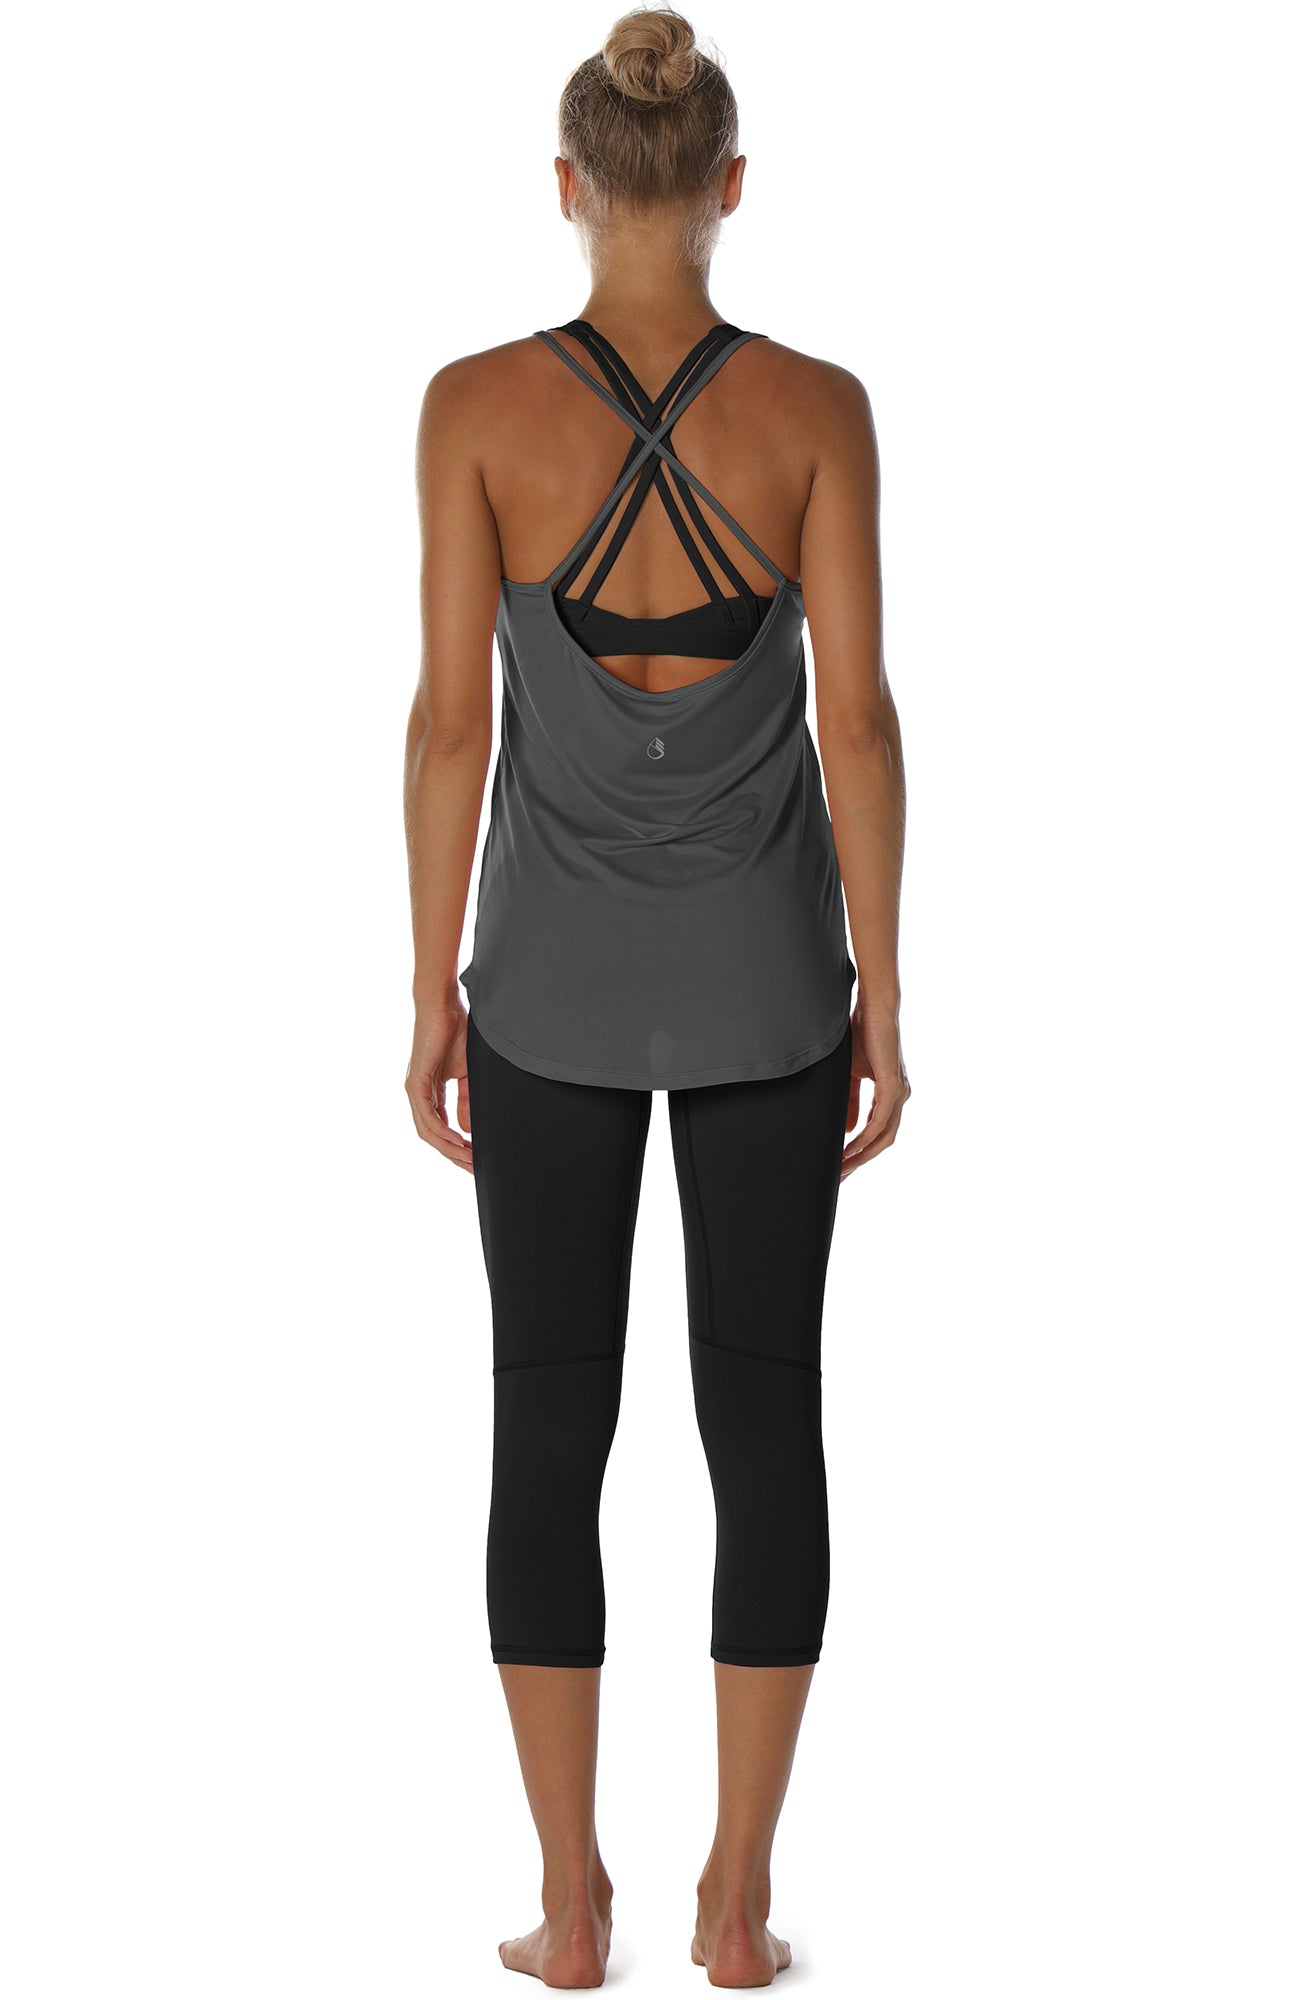 icyzone Workout Tank Tops for Women - Open Back Strappy Athletic Tanks,  Yoga Tops, Gym Shirts(Pack of 2) (S, Charcoal/Army) price in UAE,   UAE